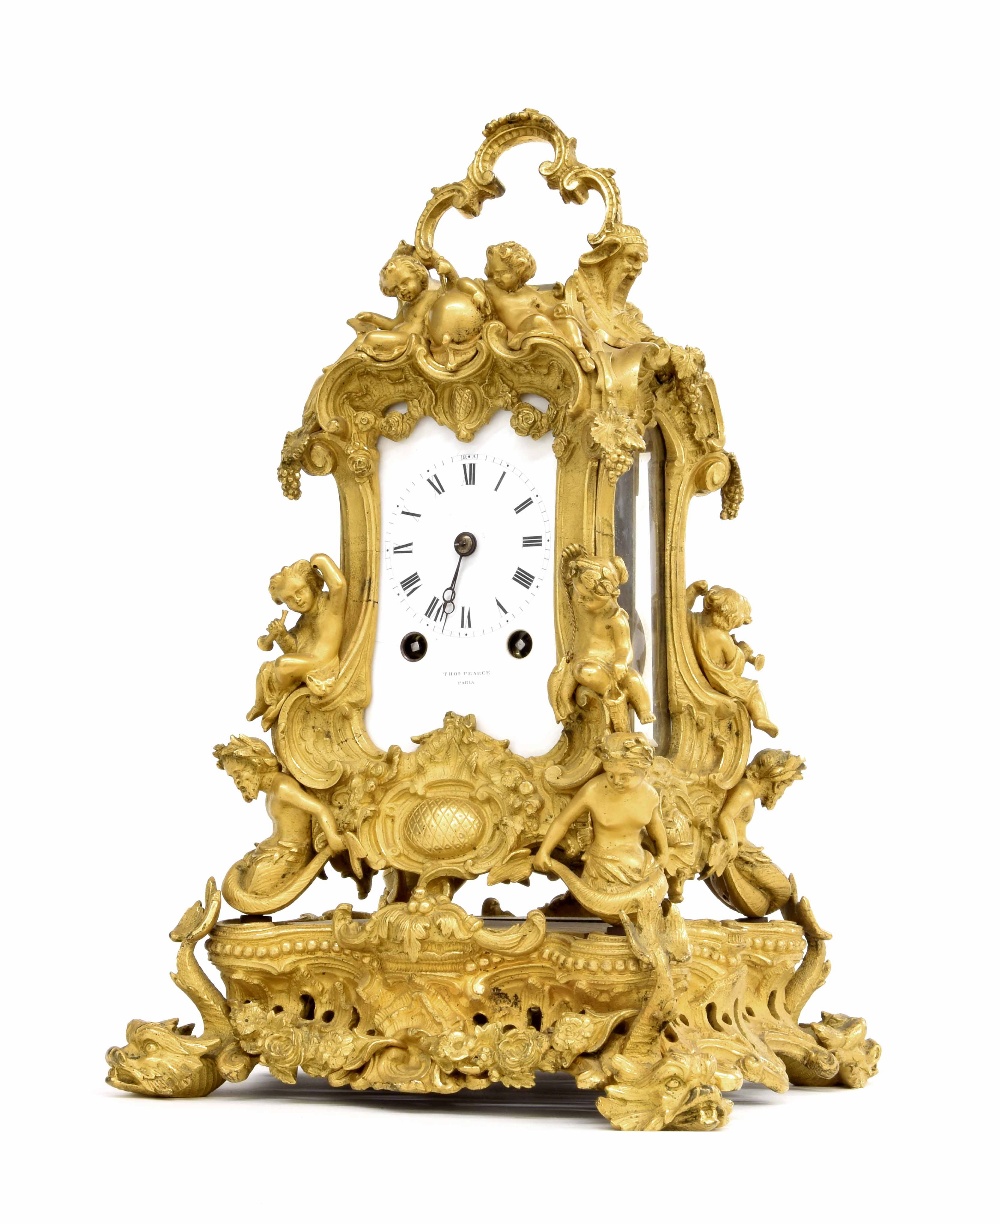 Ormolu travelling clock, circa 1840, with an enamel dial signed for Thos. Pearce Paris and similarly